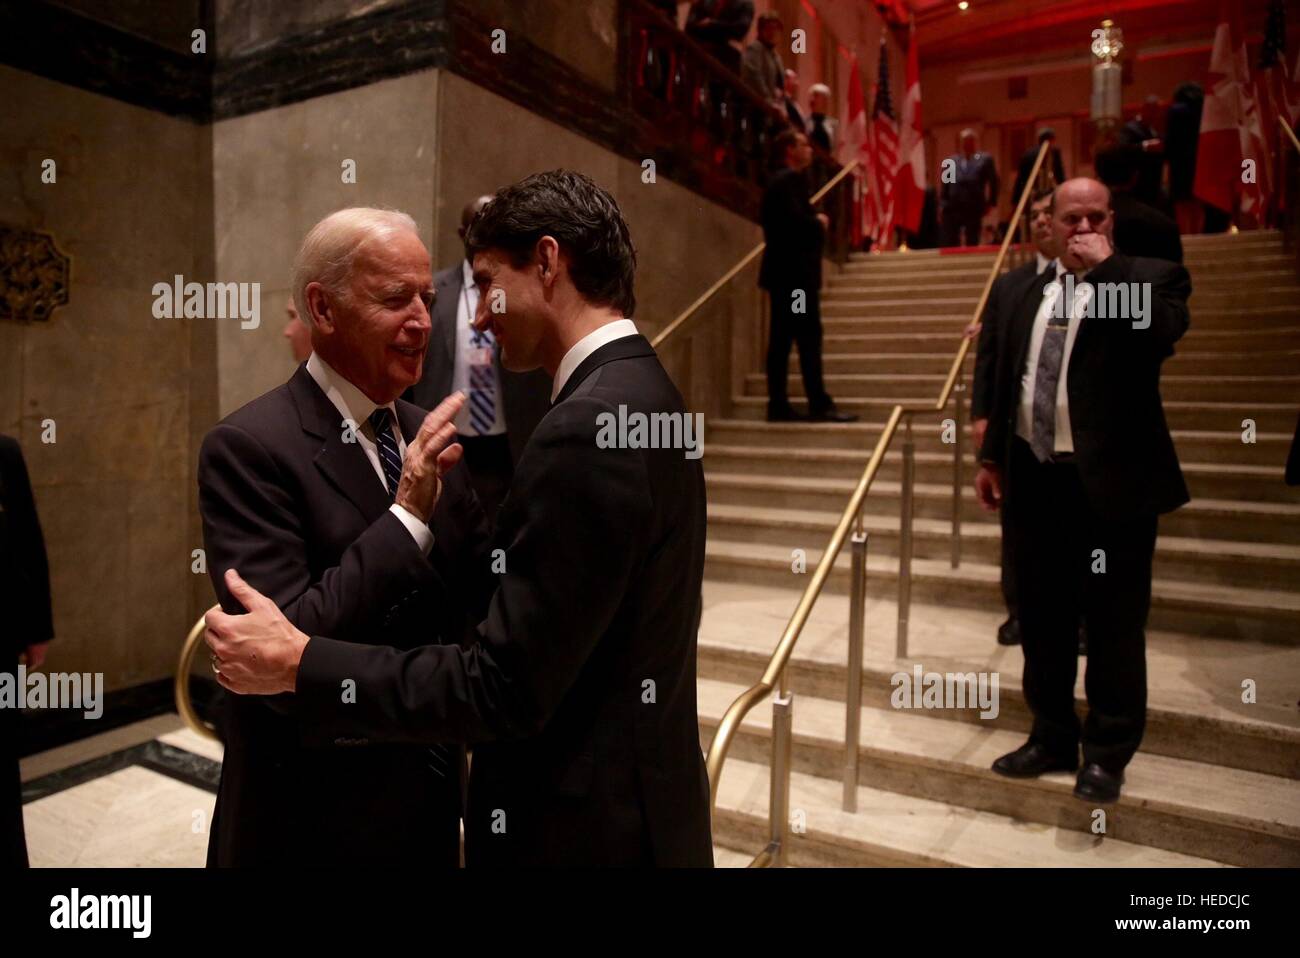 U.S. Vice President Joe Biden and Canadian Prime Minister Justin Trudeau talk after a dinner event December 8, 2016 in Ottawa, Ontario, Canada. Stock Photo